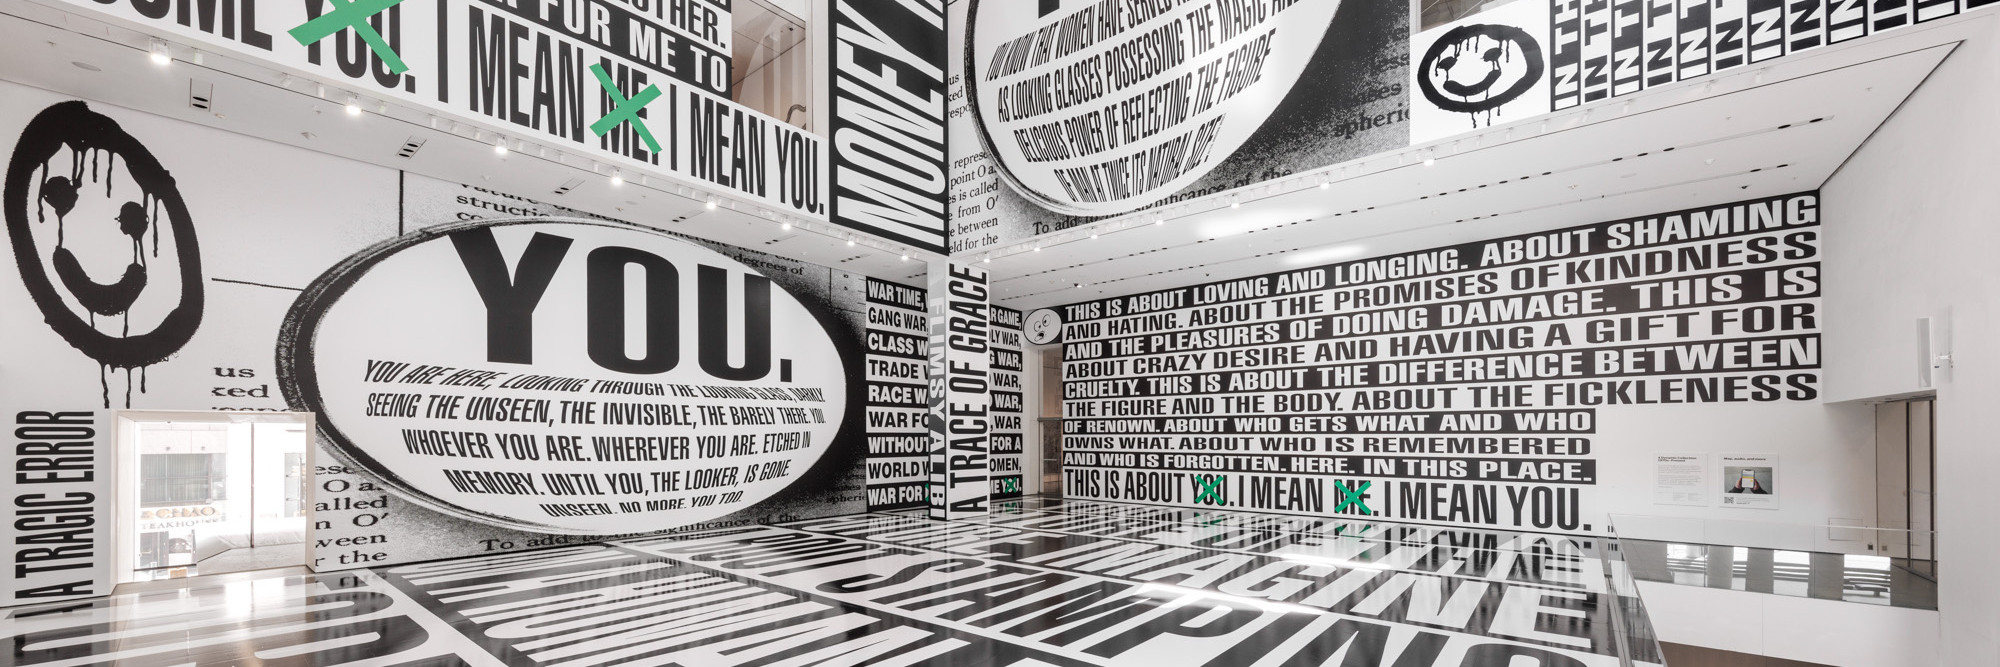 Barbara Kruger: Thinking of You. I Mean Me. I Mean You. | MoMA